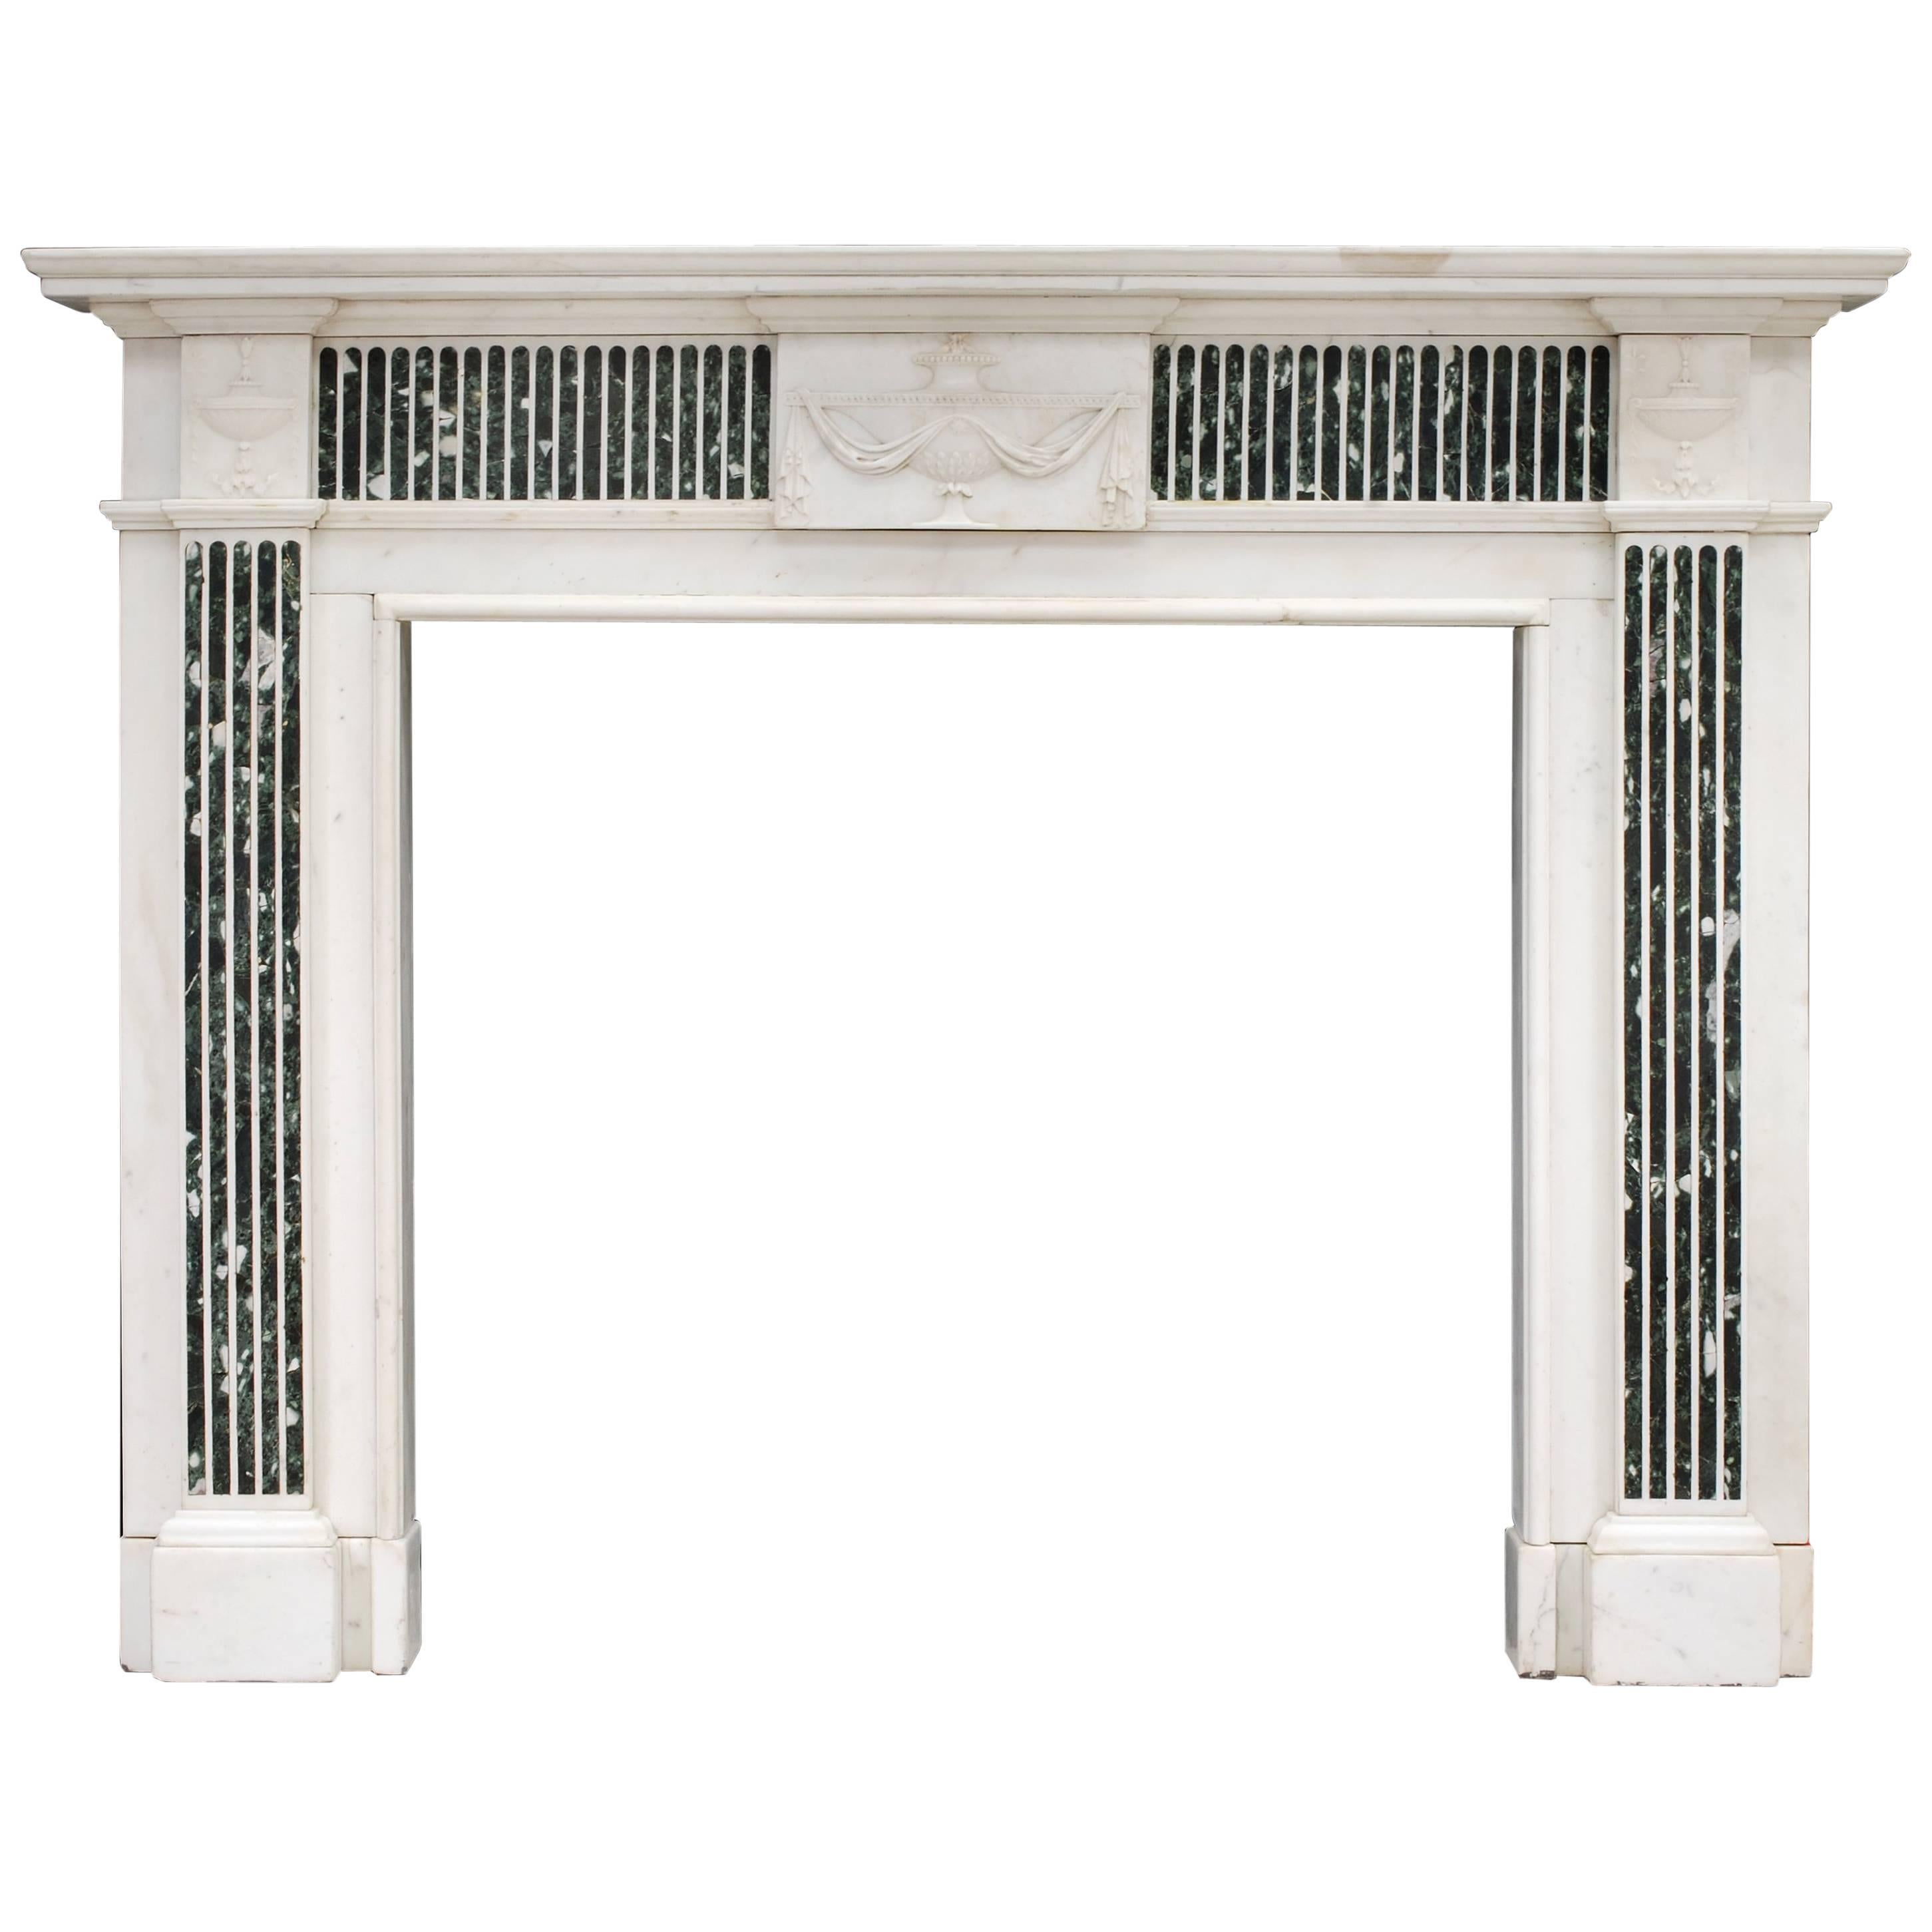 George III Style English Statuary Marble Fireplace with Inlaid Tinos Marble